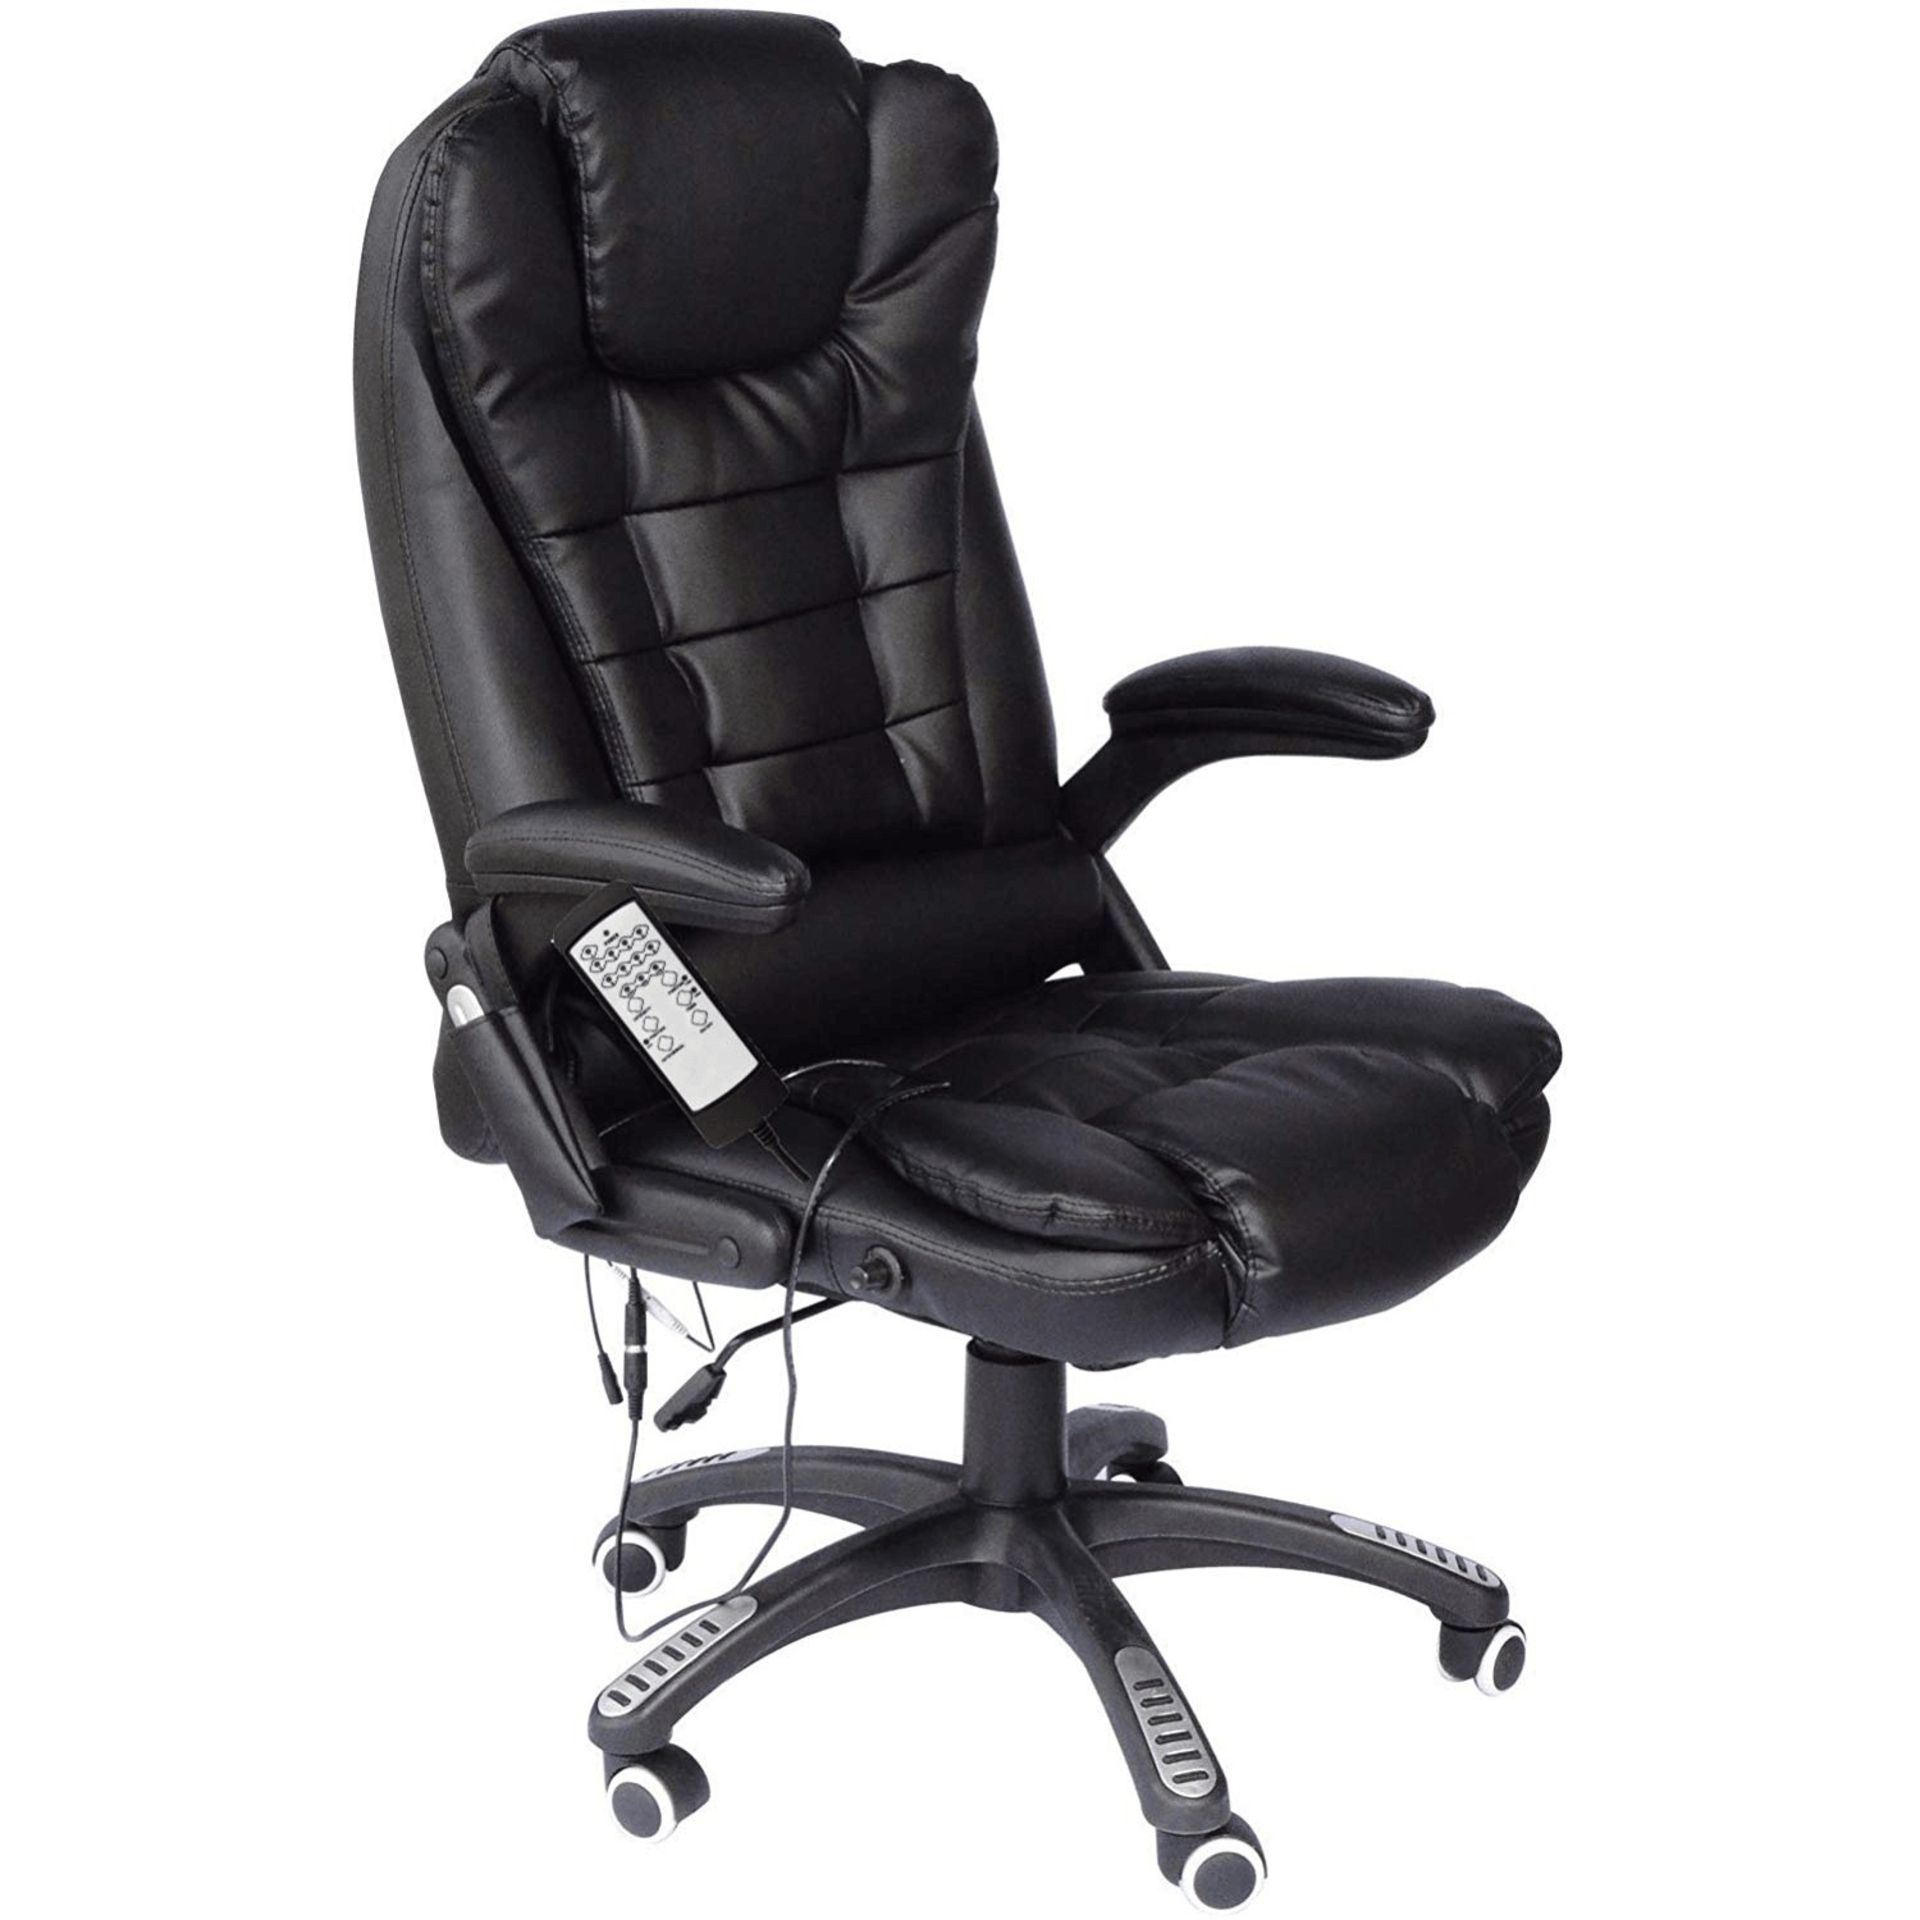 Executive Recline Padded Swivel Office Chair with Vibrating Massage - ER29